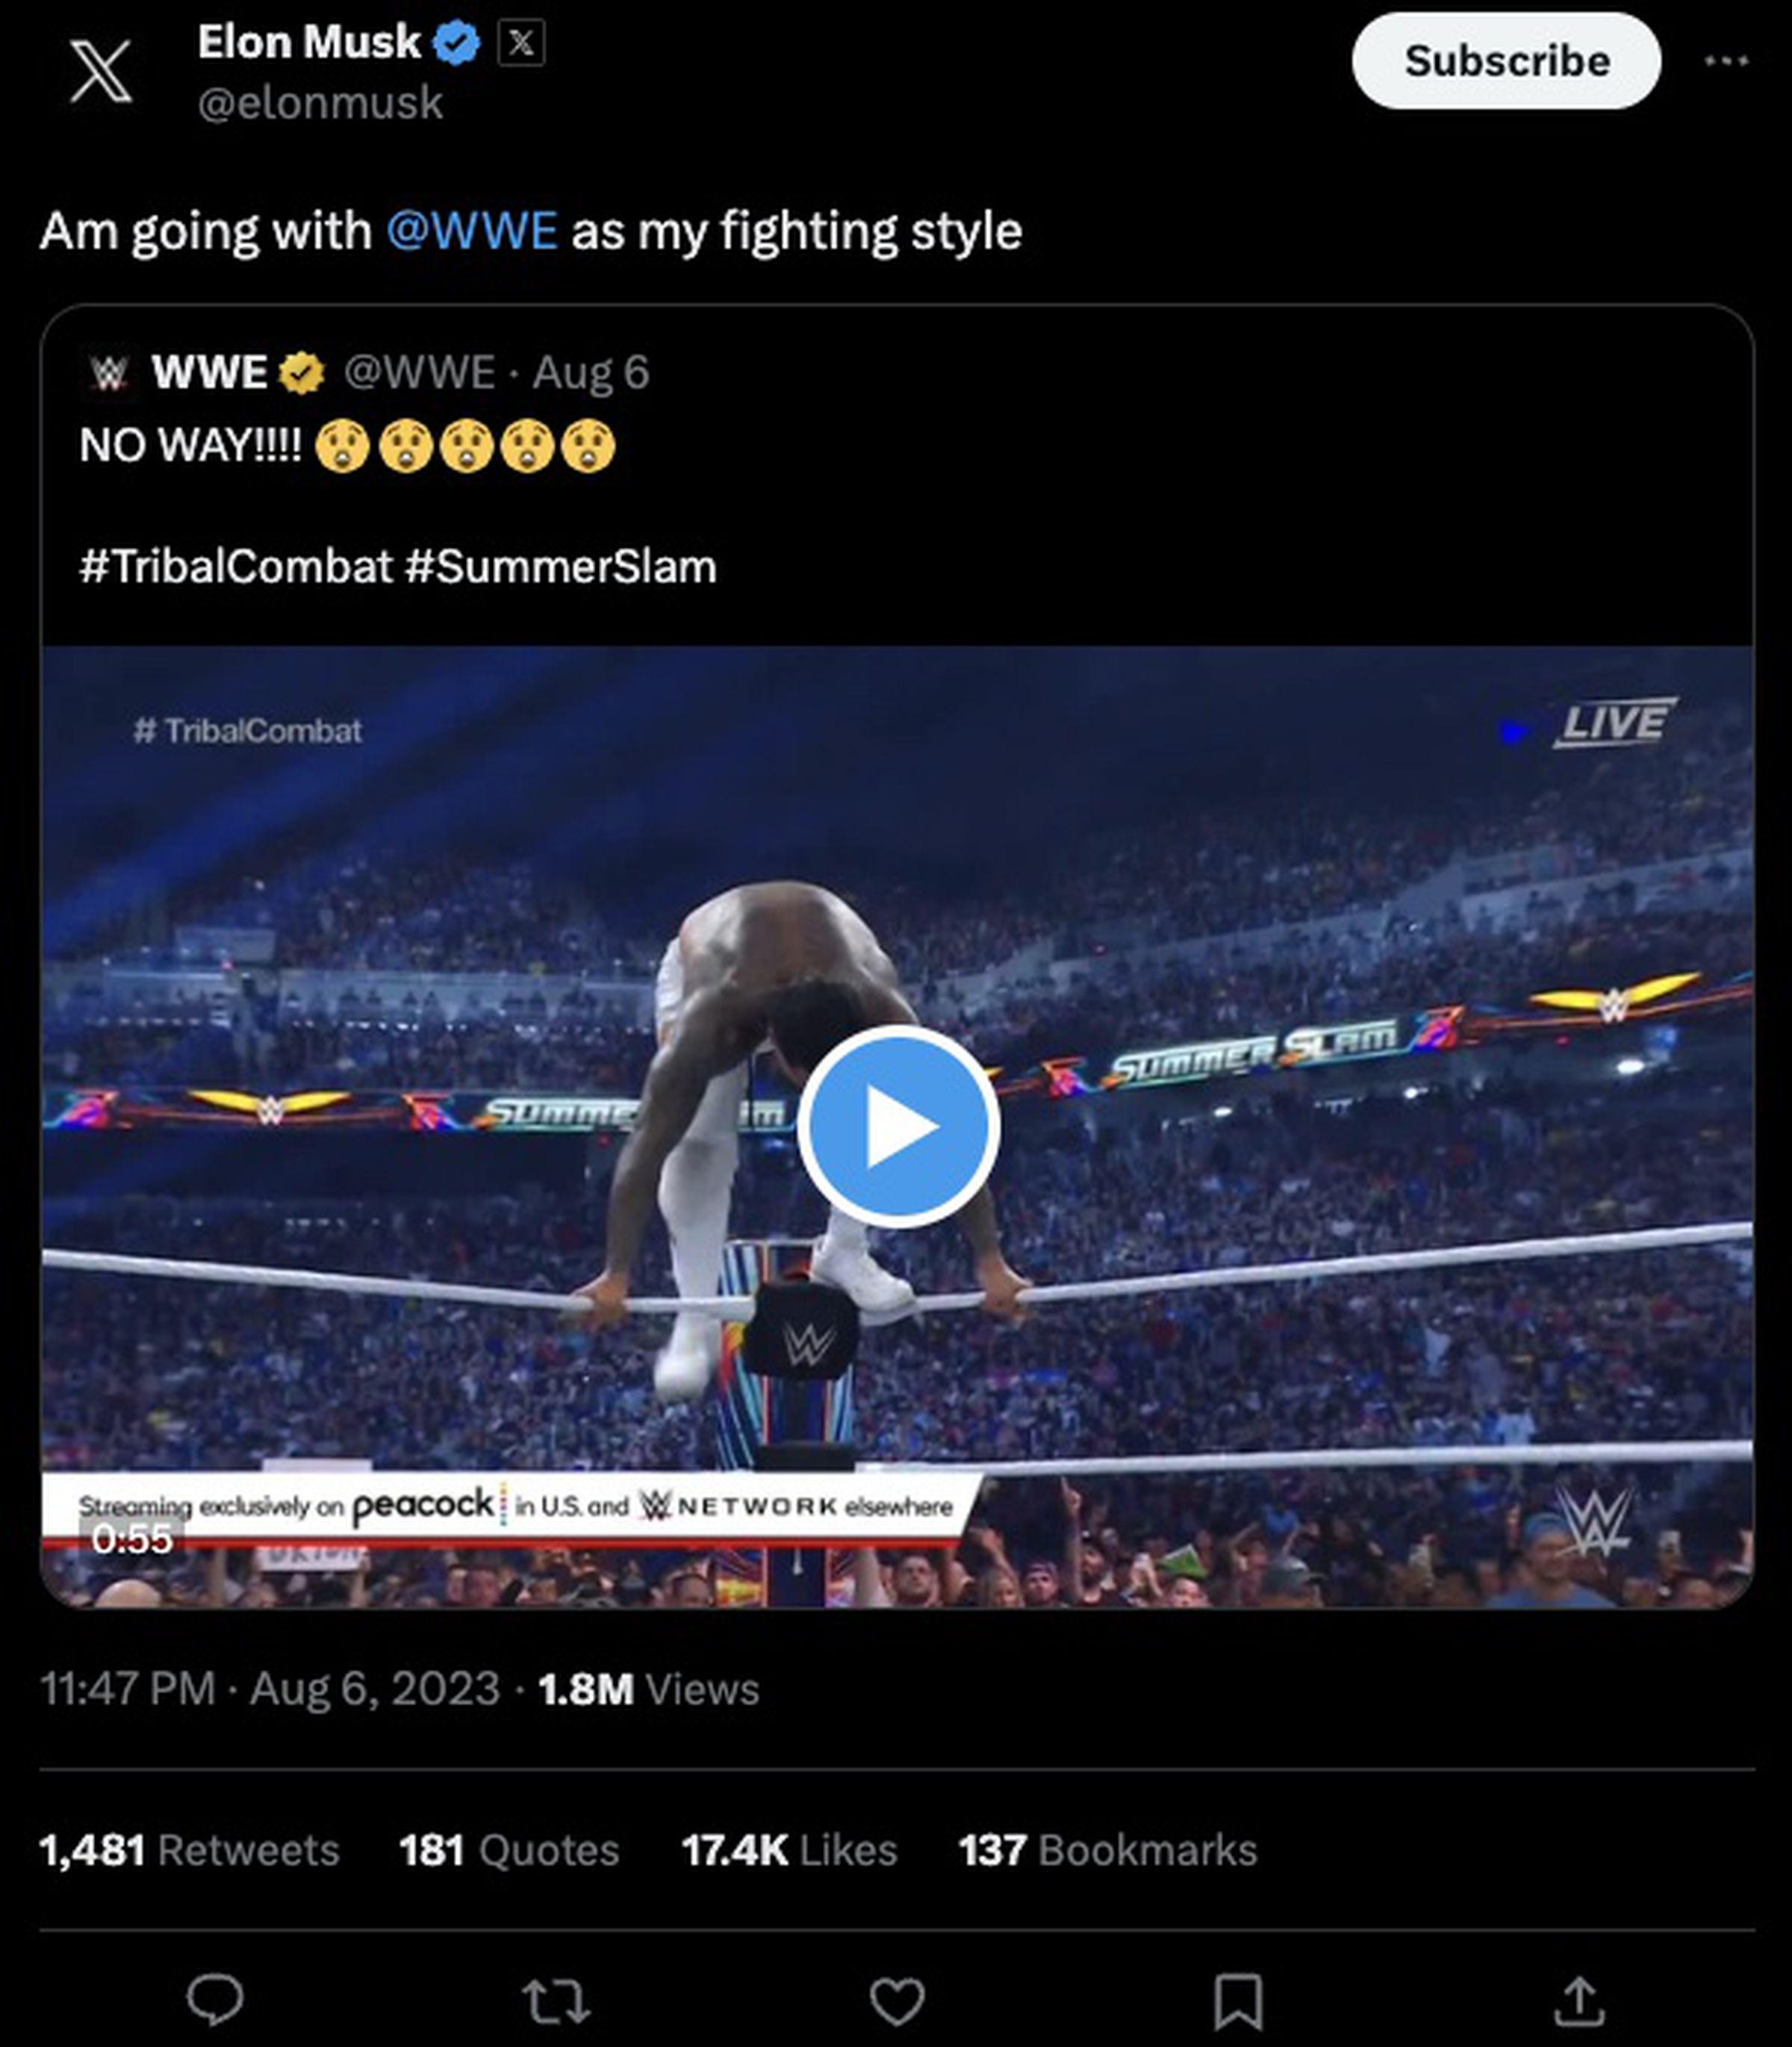 Elon Musk post: “Am going with @WWE as my fighting style” (quoting a video clip from a WWE event)